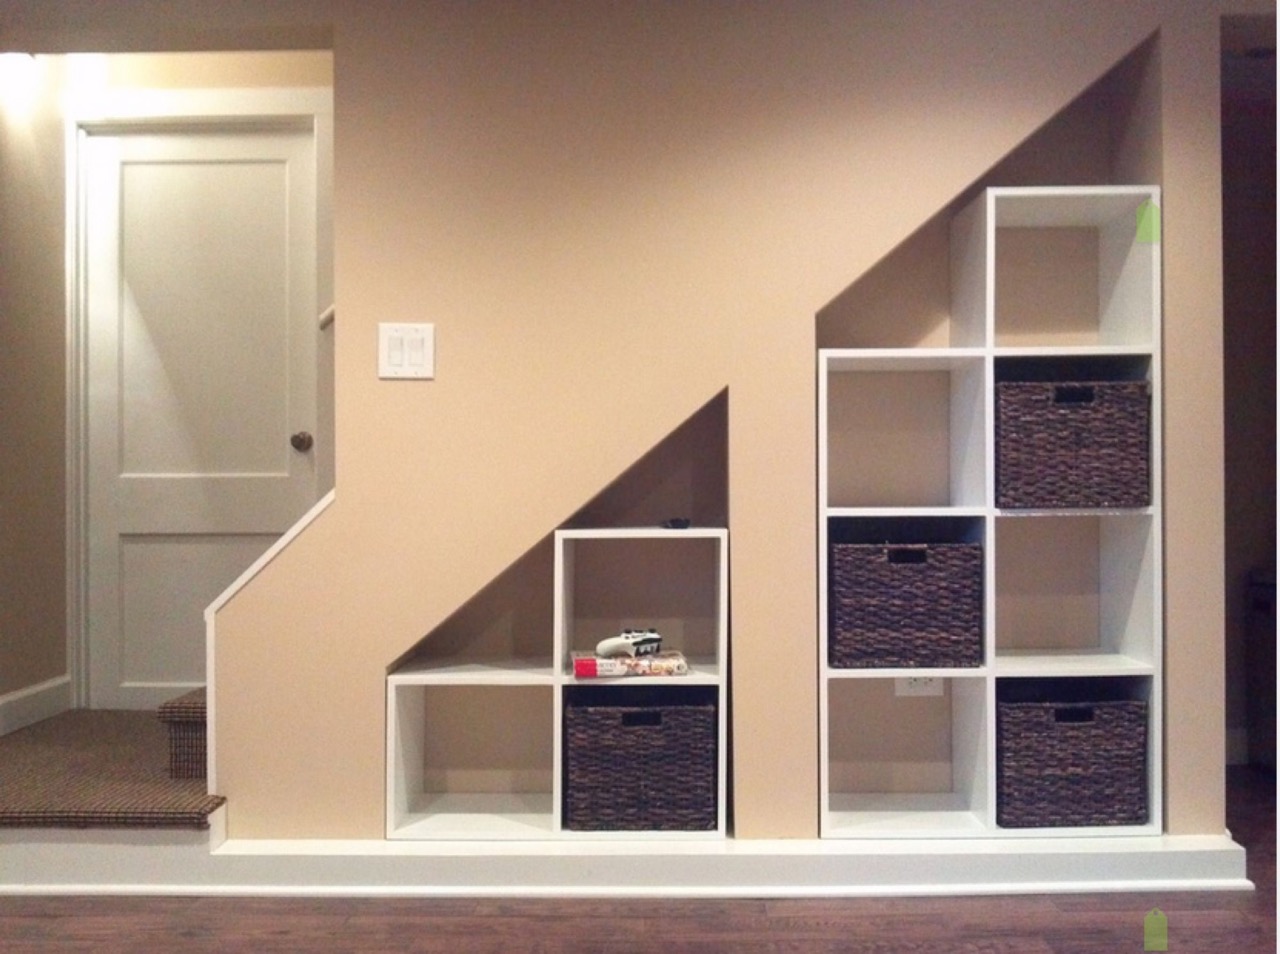 How To Build Storage Under Basement Stairs In Only A Few Hours | Storables